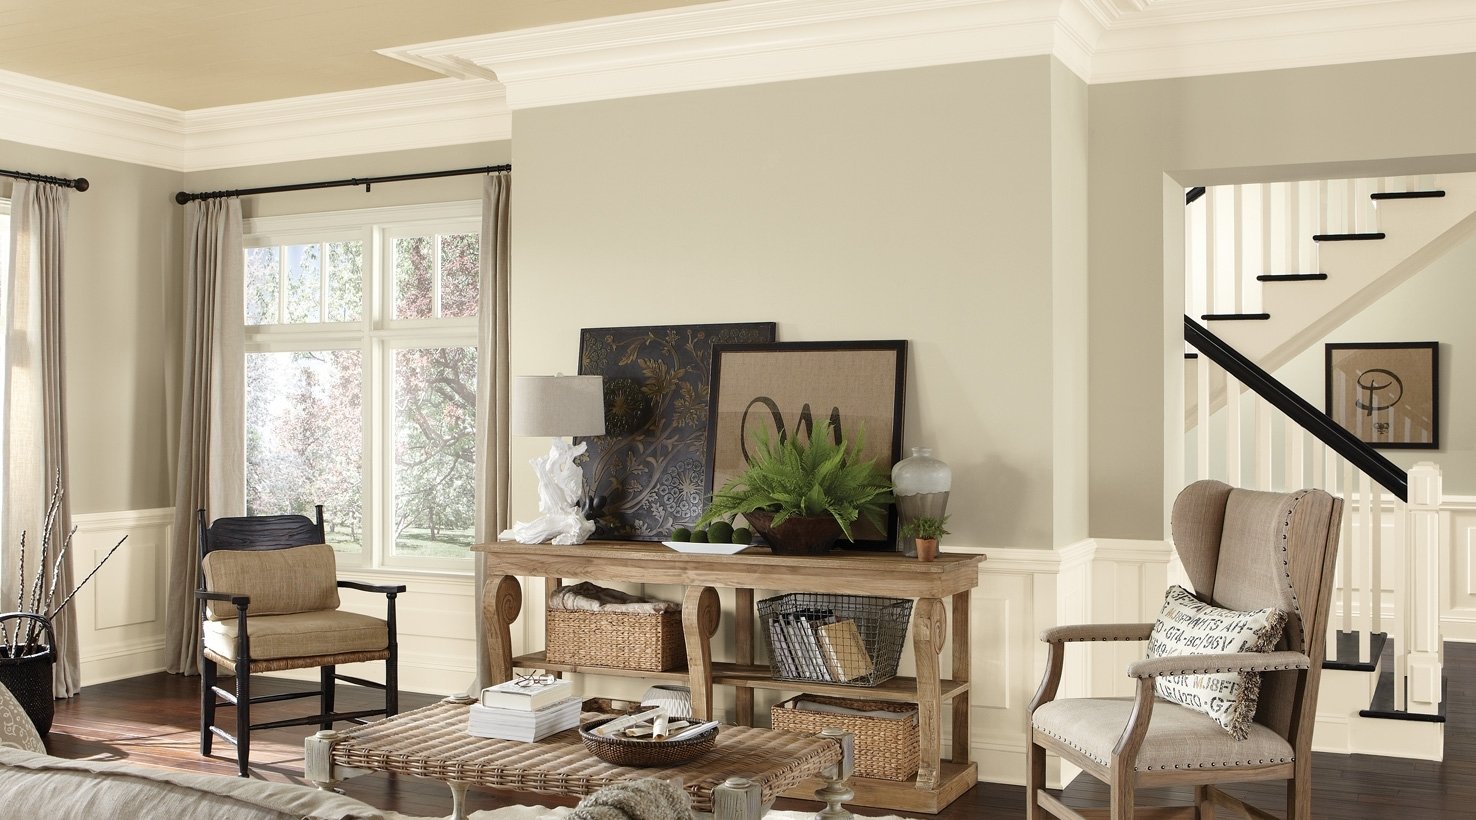 10 Wonderful Paint Ideas For Living Room living room paint color ideas inspiration gallery sherwin williams 5 2024